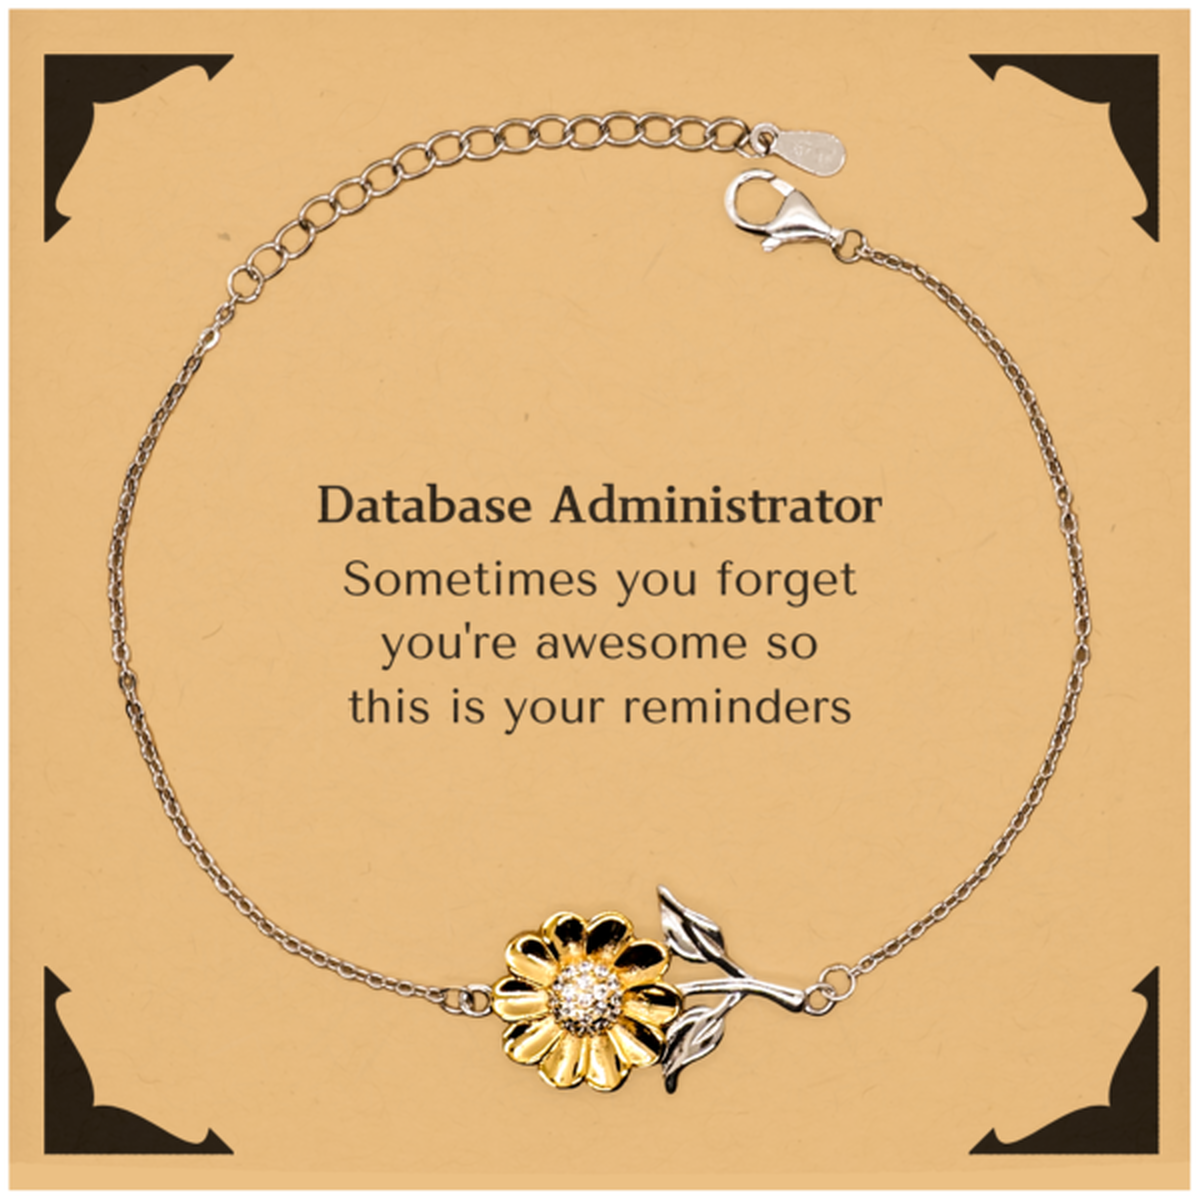 Sentimental Database Administrator Sunflower Bracelet, Database Administrator Sometimes you forget you're awesome so this is your reminders, Graduation Christmas Birthday Gifts for Database Administrator, Men, Women, Coworkers